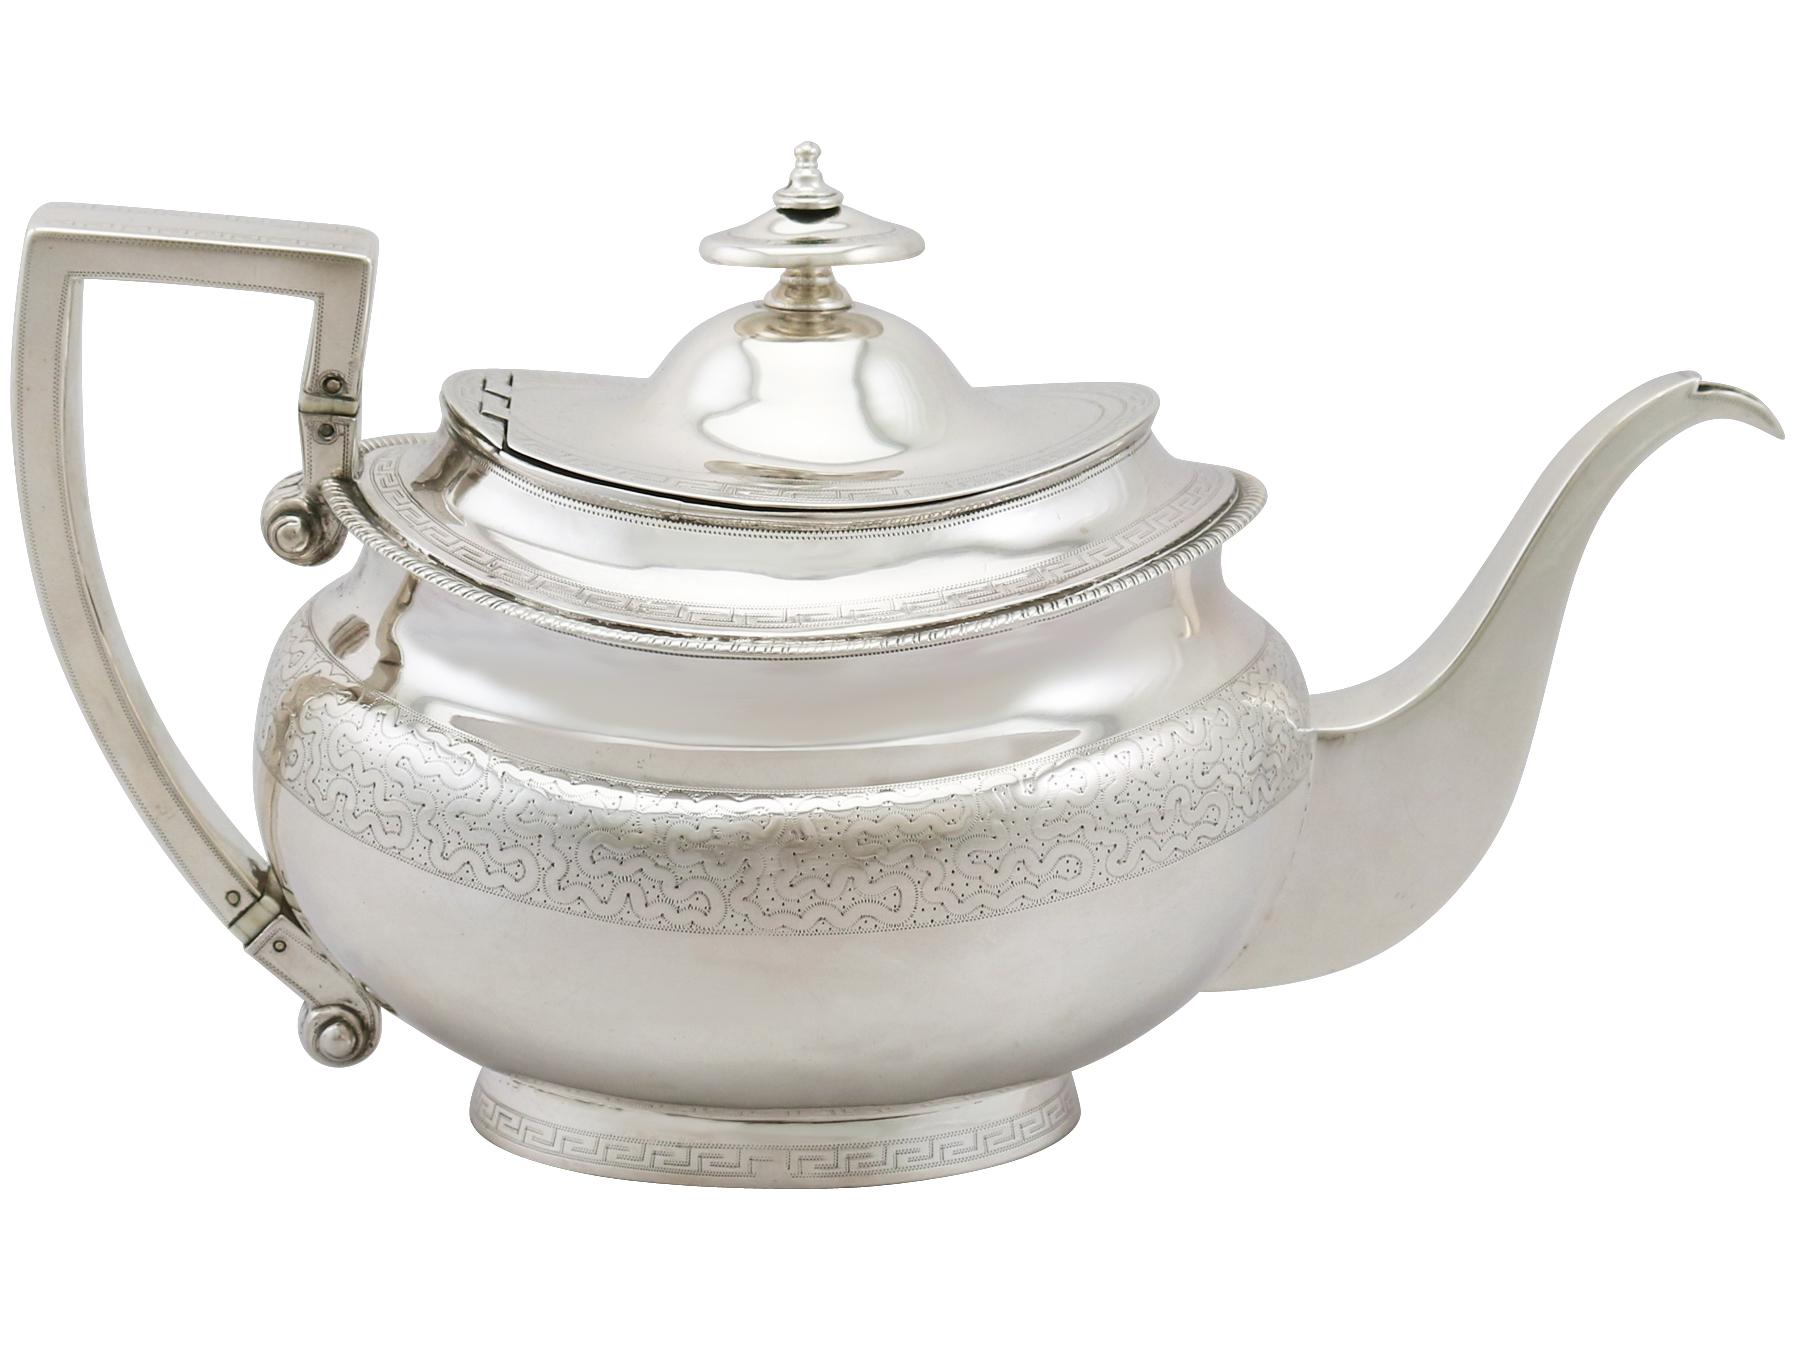 A fine antique Georgian English sterling silver three piece tea service with matching teapot stand / set; part of our silver teaware collection.

The pieces of this George III sterling silver three piece tea service with matching teapot stand have